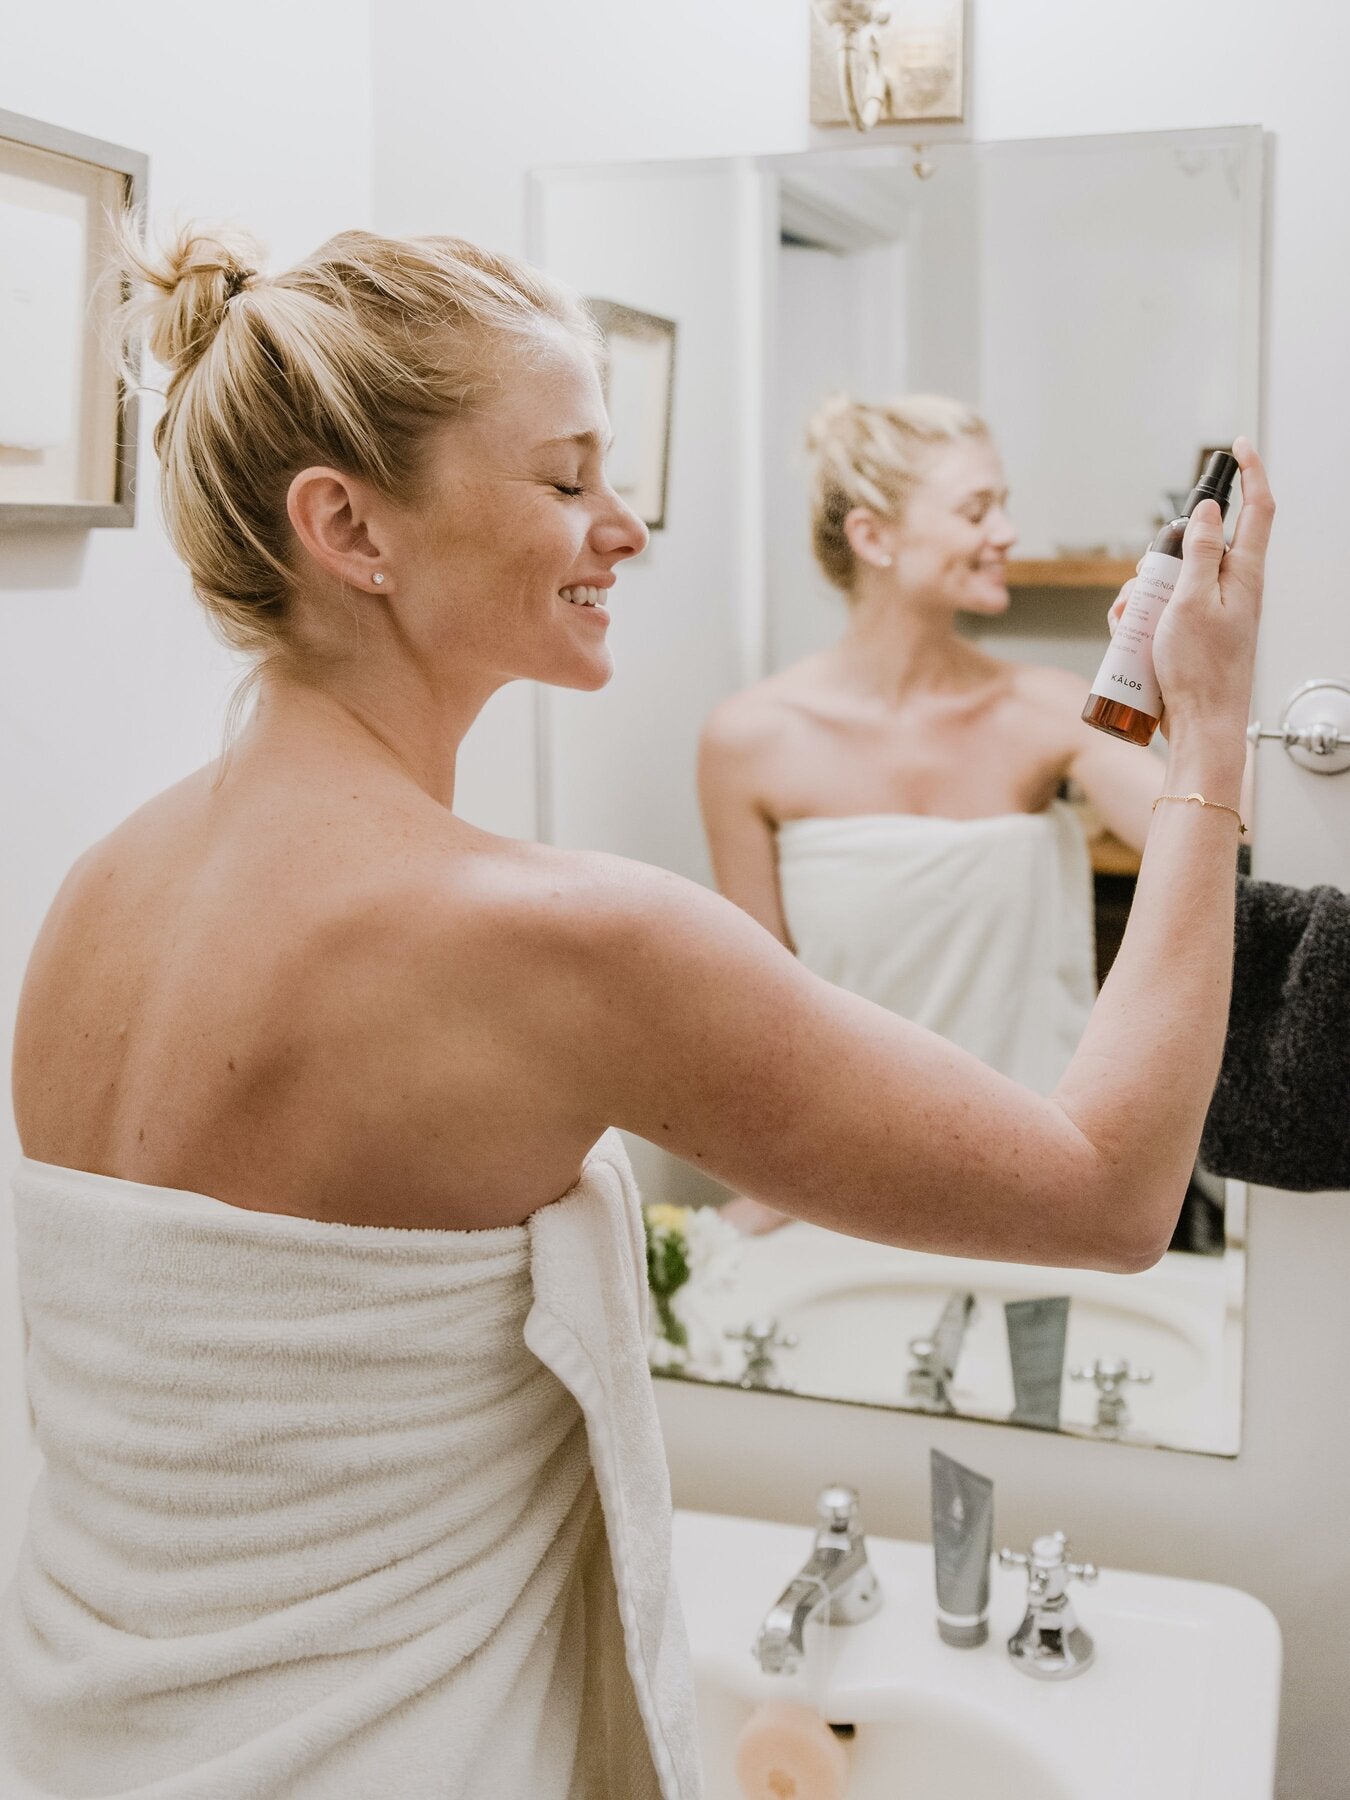 How Long Should You Leave Your Facial Cleanser on Your Face? - VIVALUI